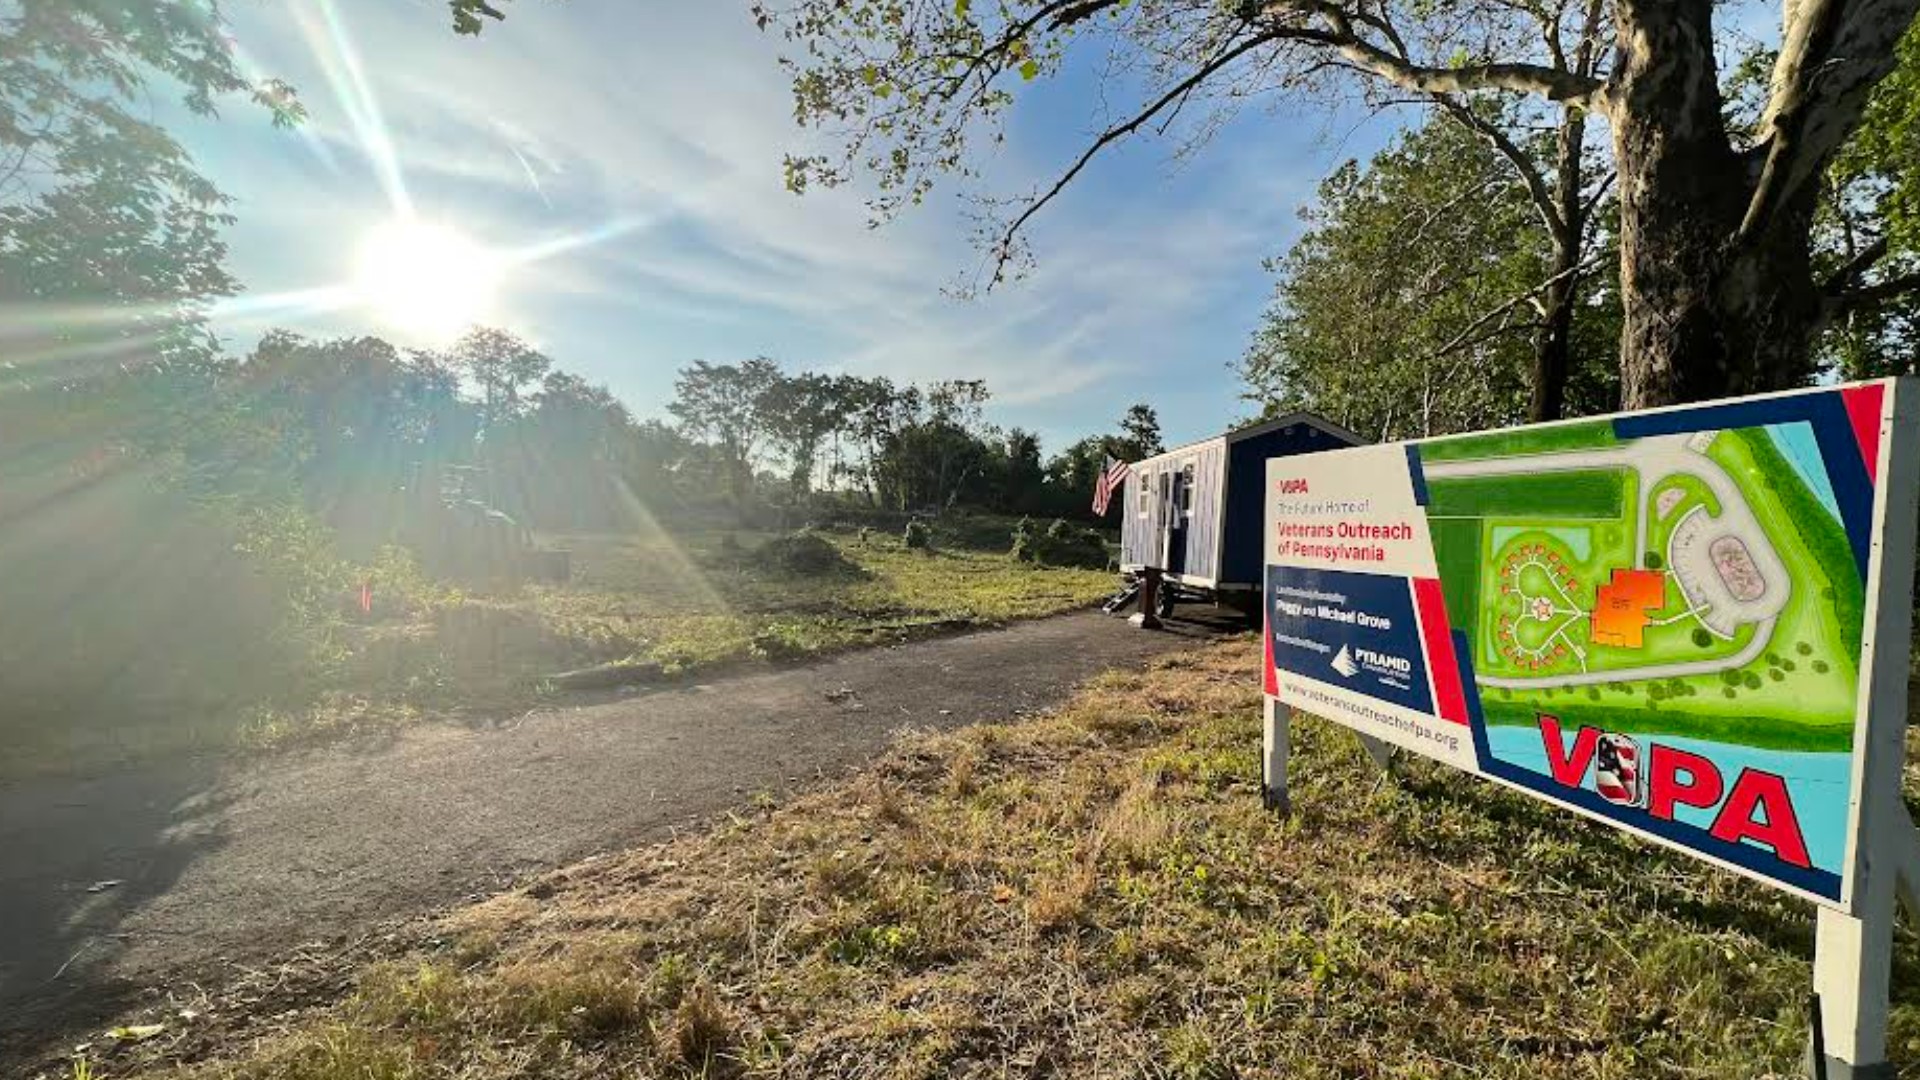 A groundbreaking ceremony for 15 tiny homes that are transitional and therapeutic housing for veterans who are experiencing homelessness will take place today.